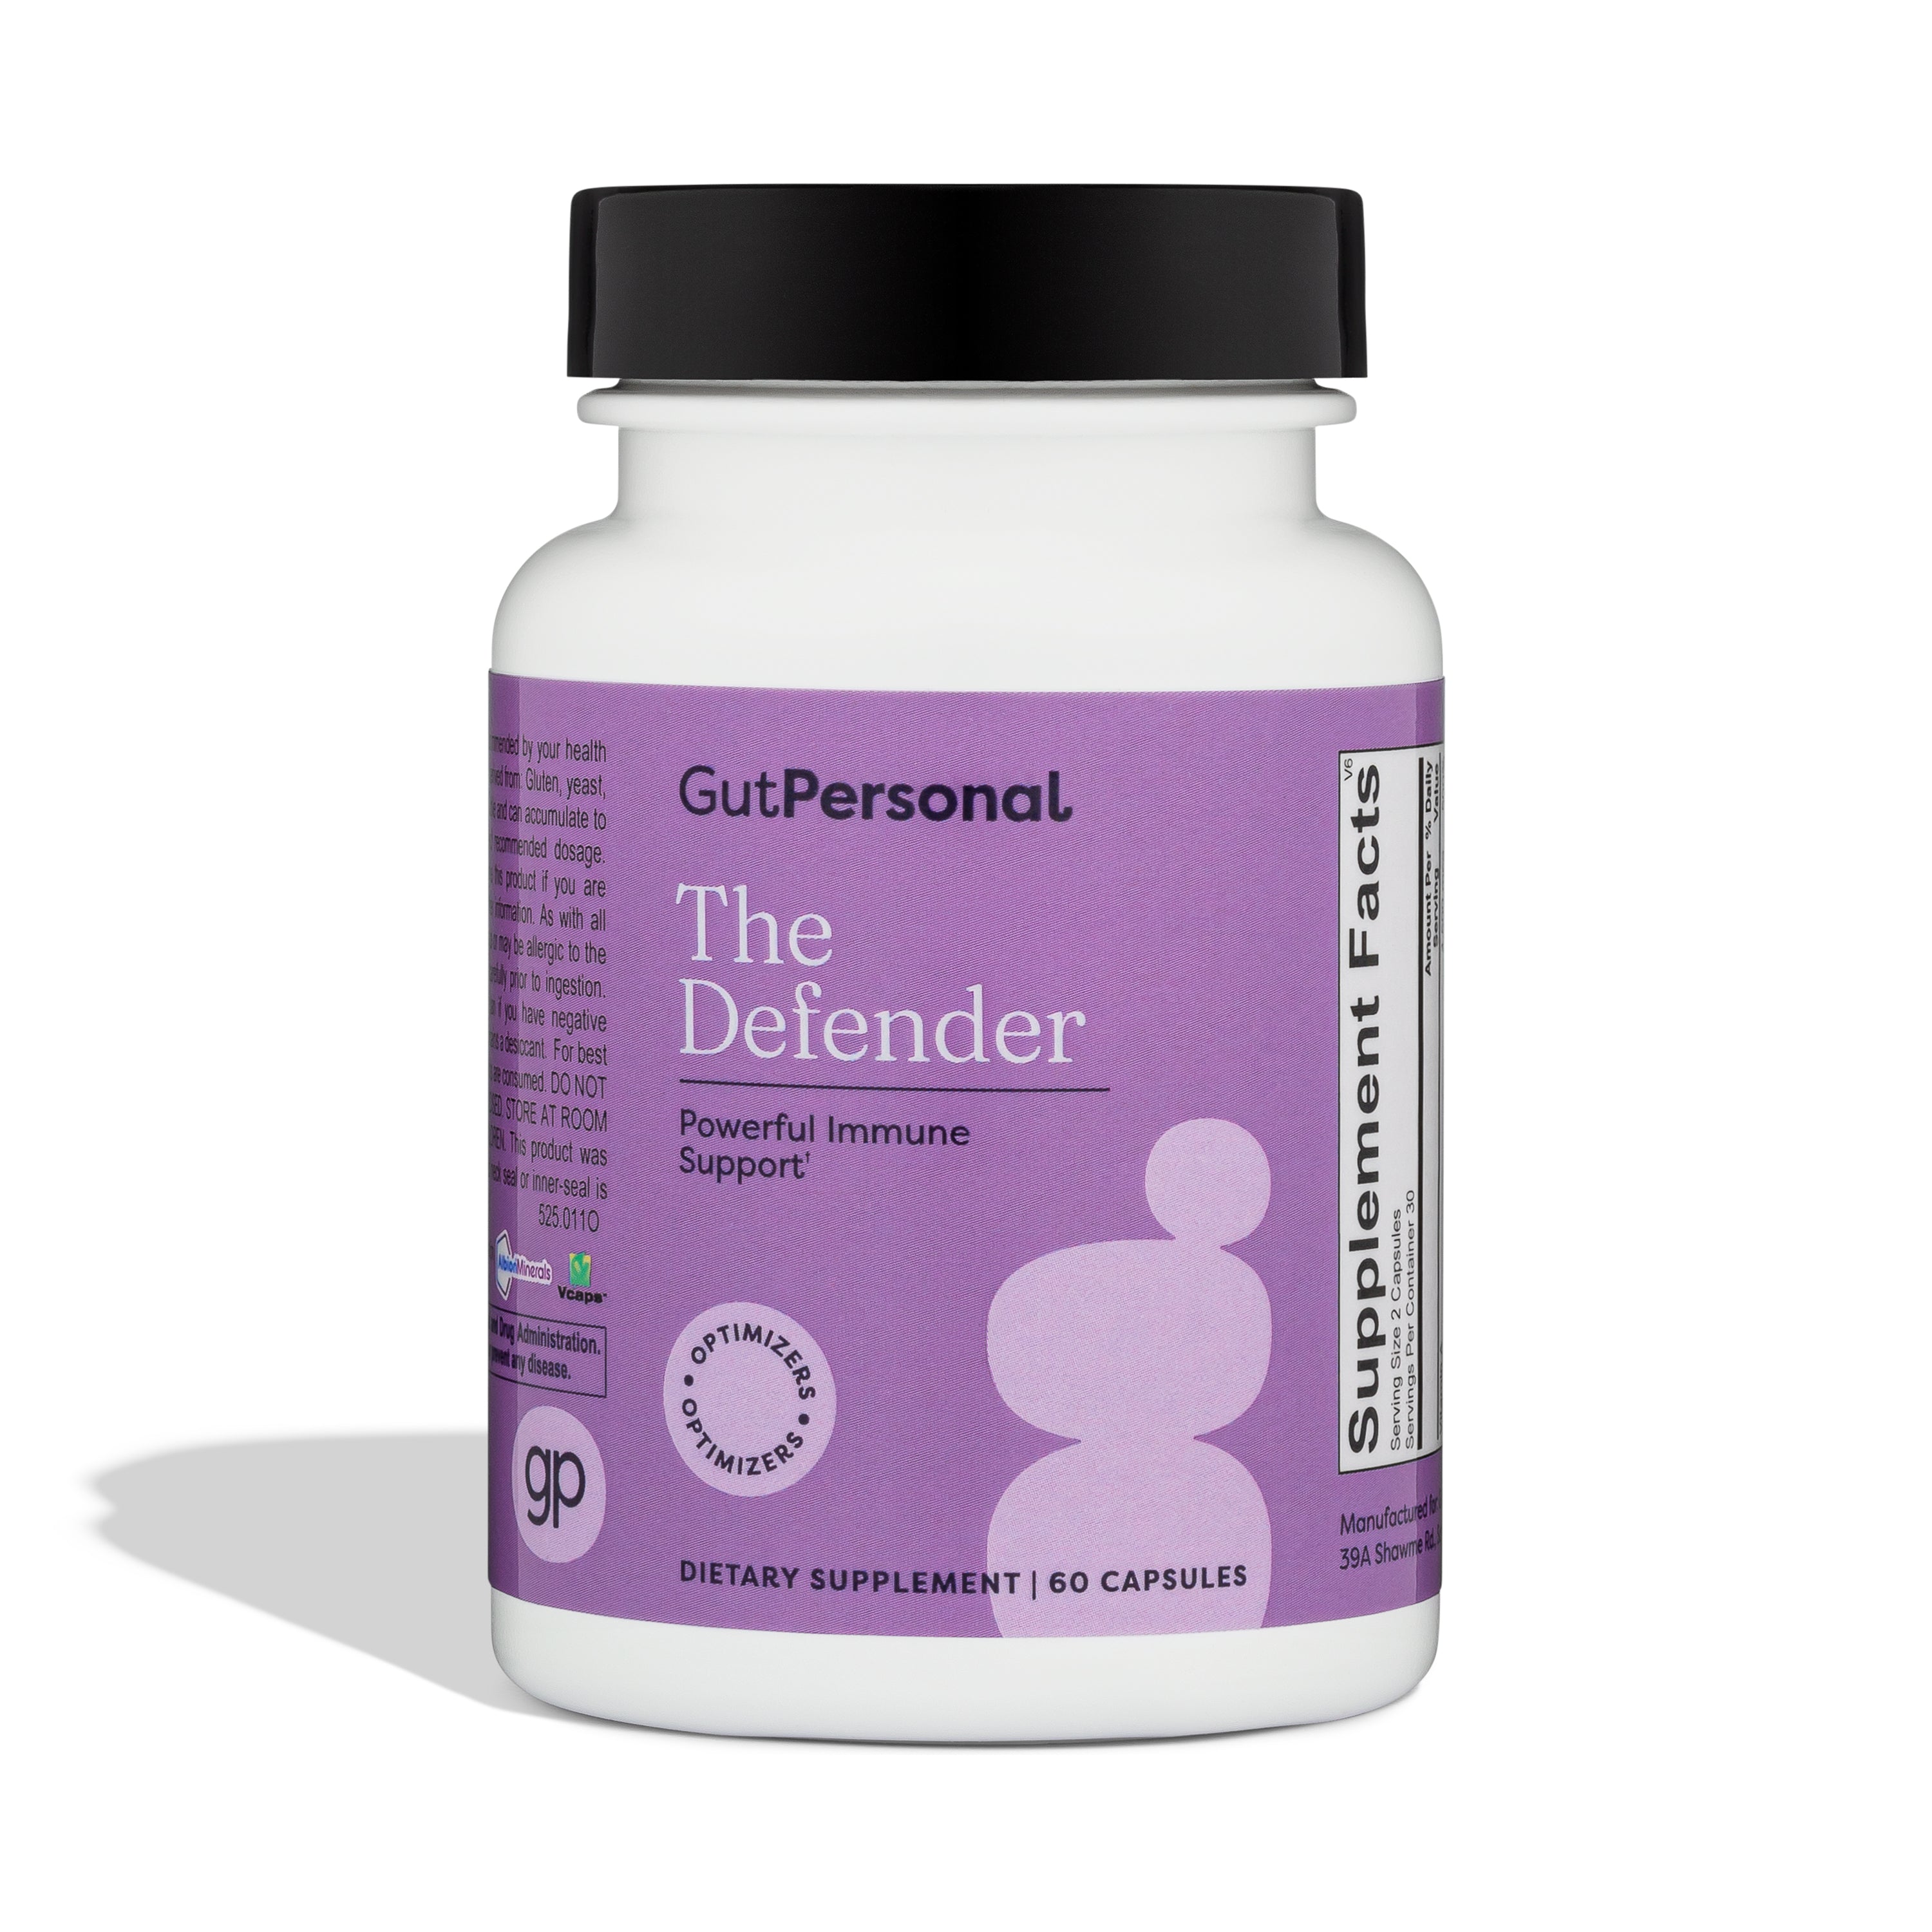 The Defender: Powerful Immune Support